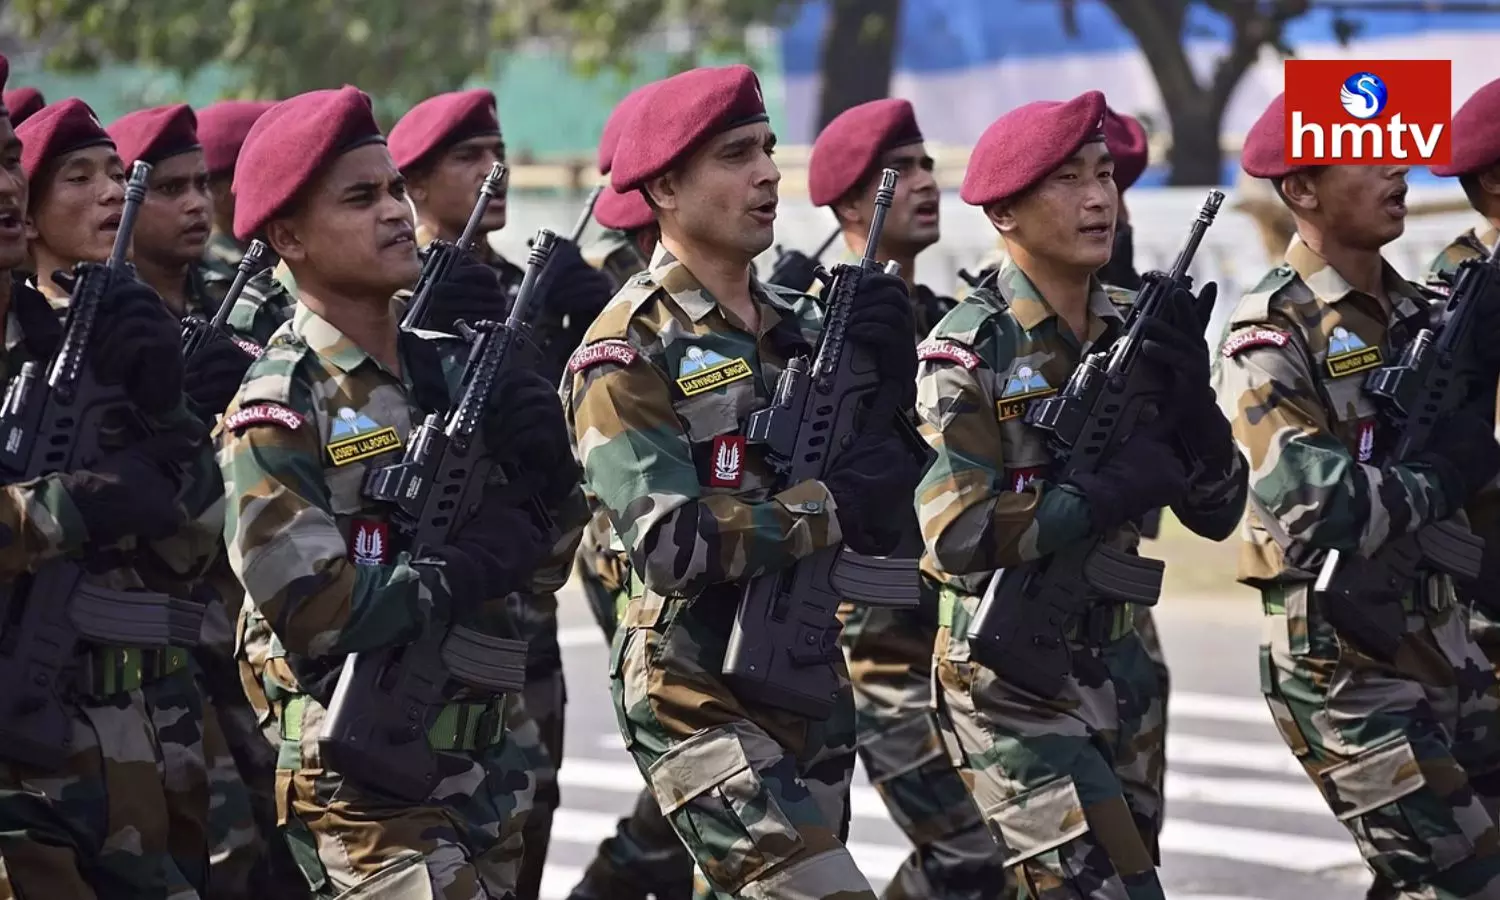 Short Service Commission Recruitment in Indian Army Salary 2.50 Lakhs per Month if Selected